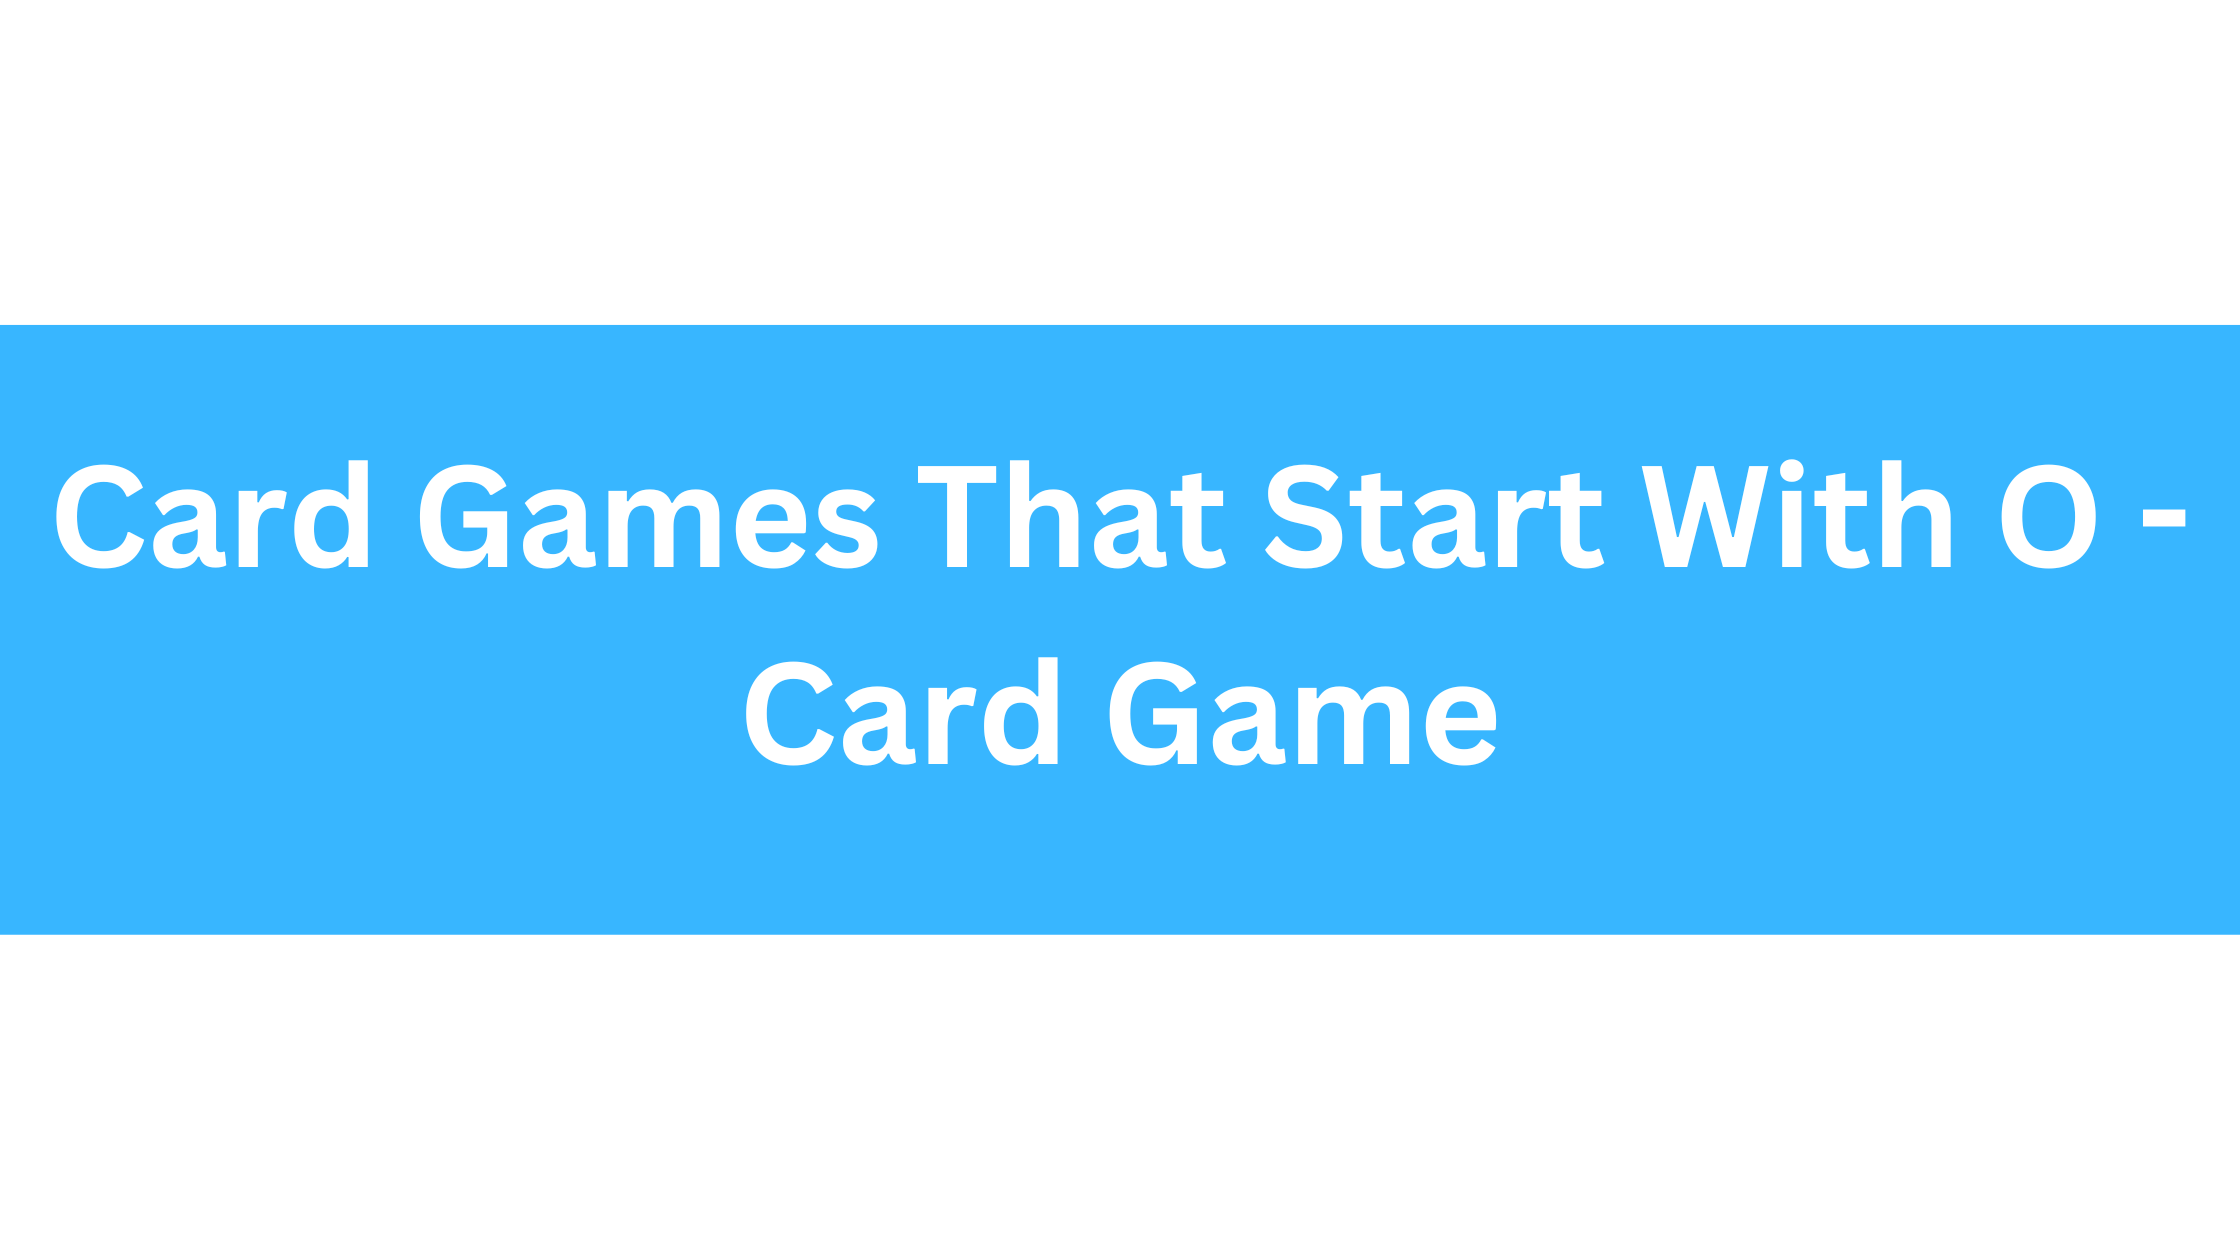 Card Games That Start With O